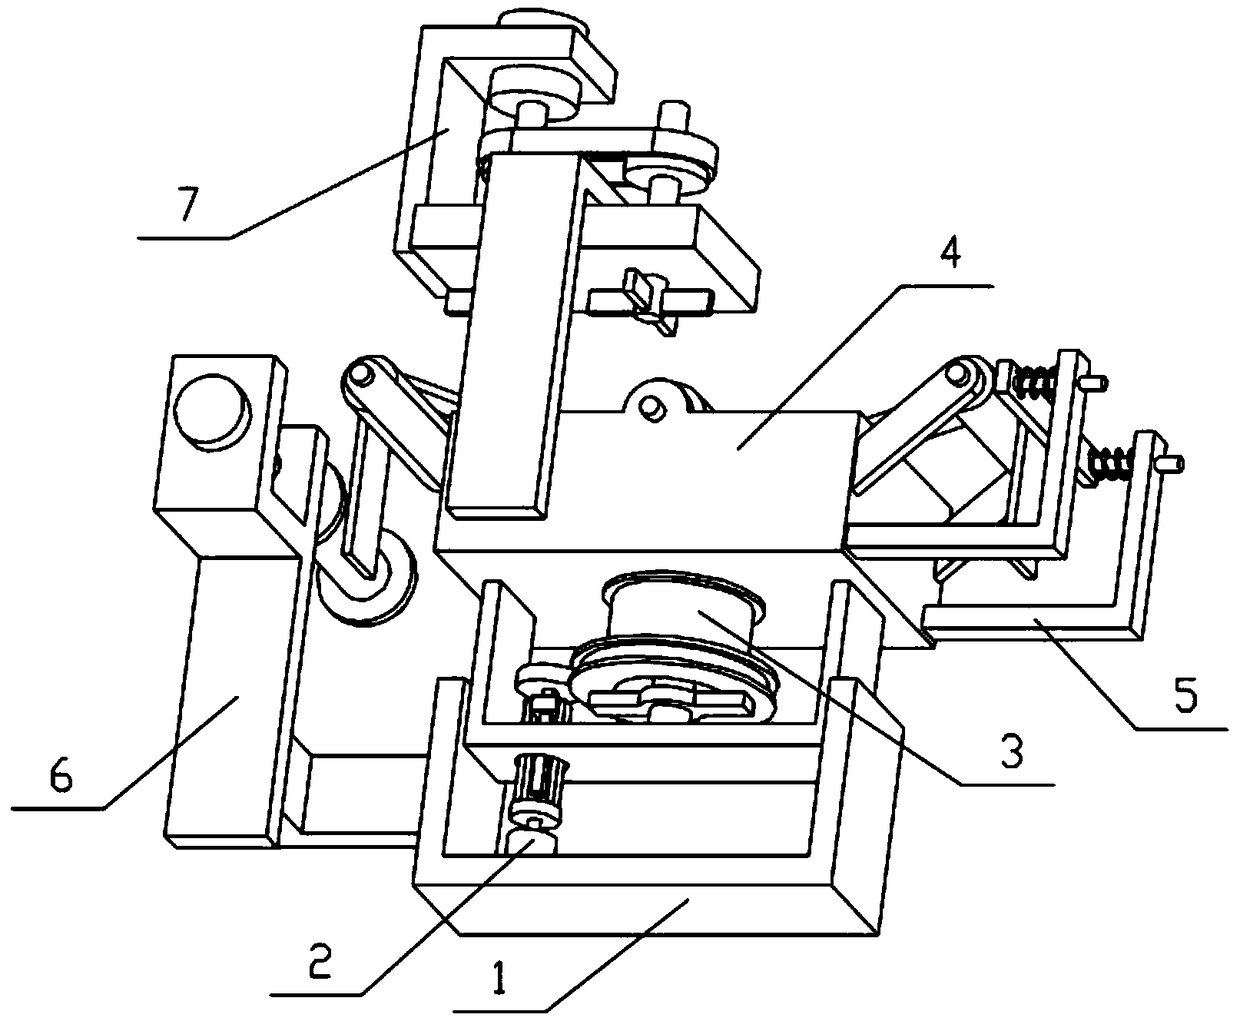 Cloth printing and dyeing device